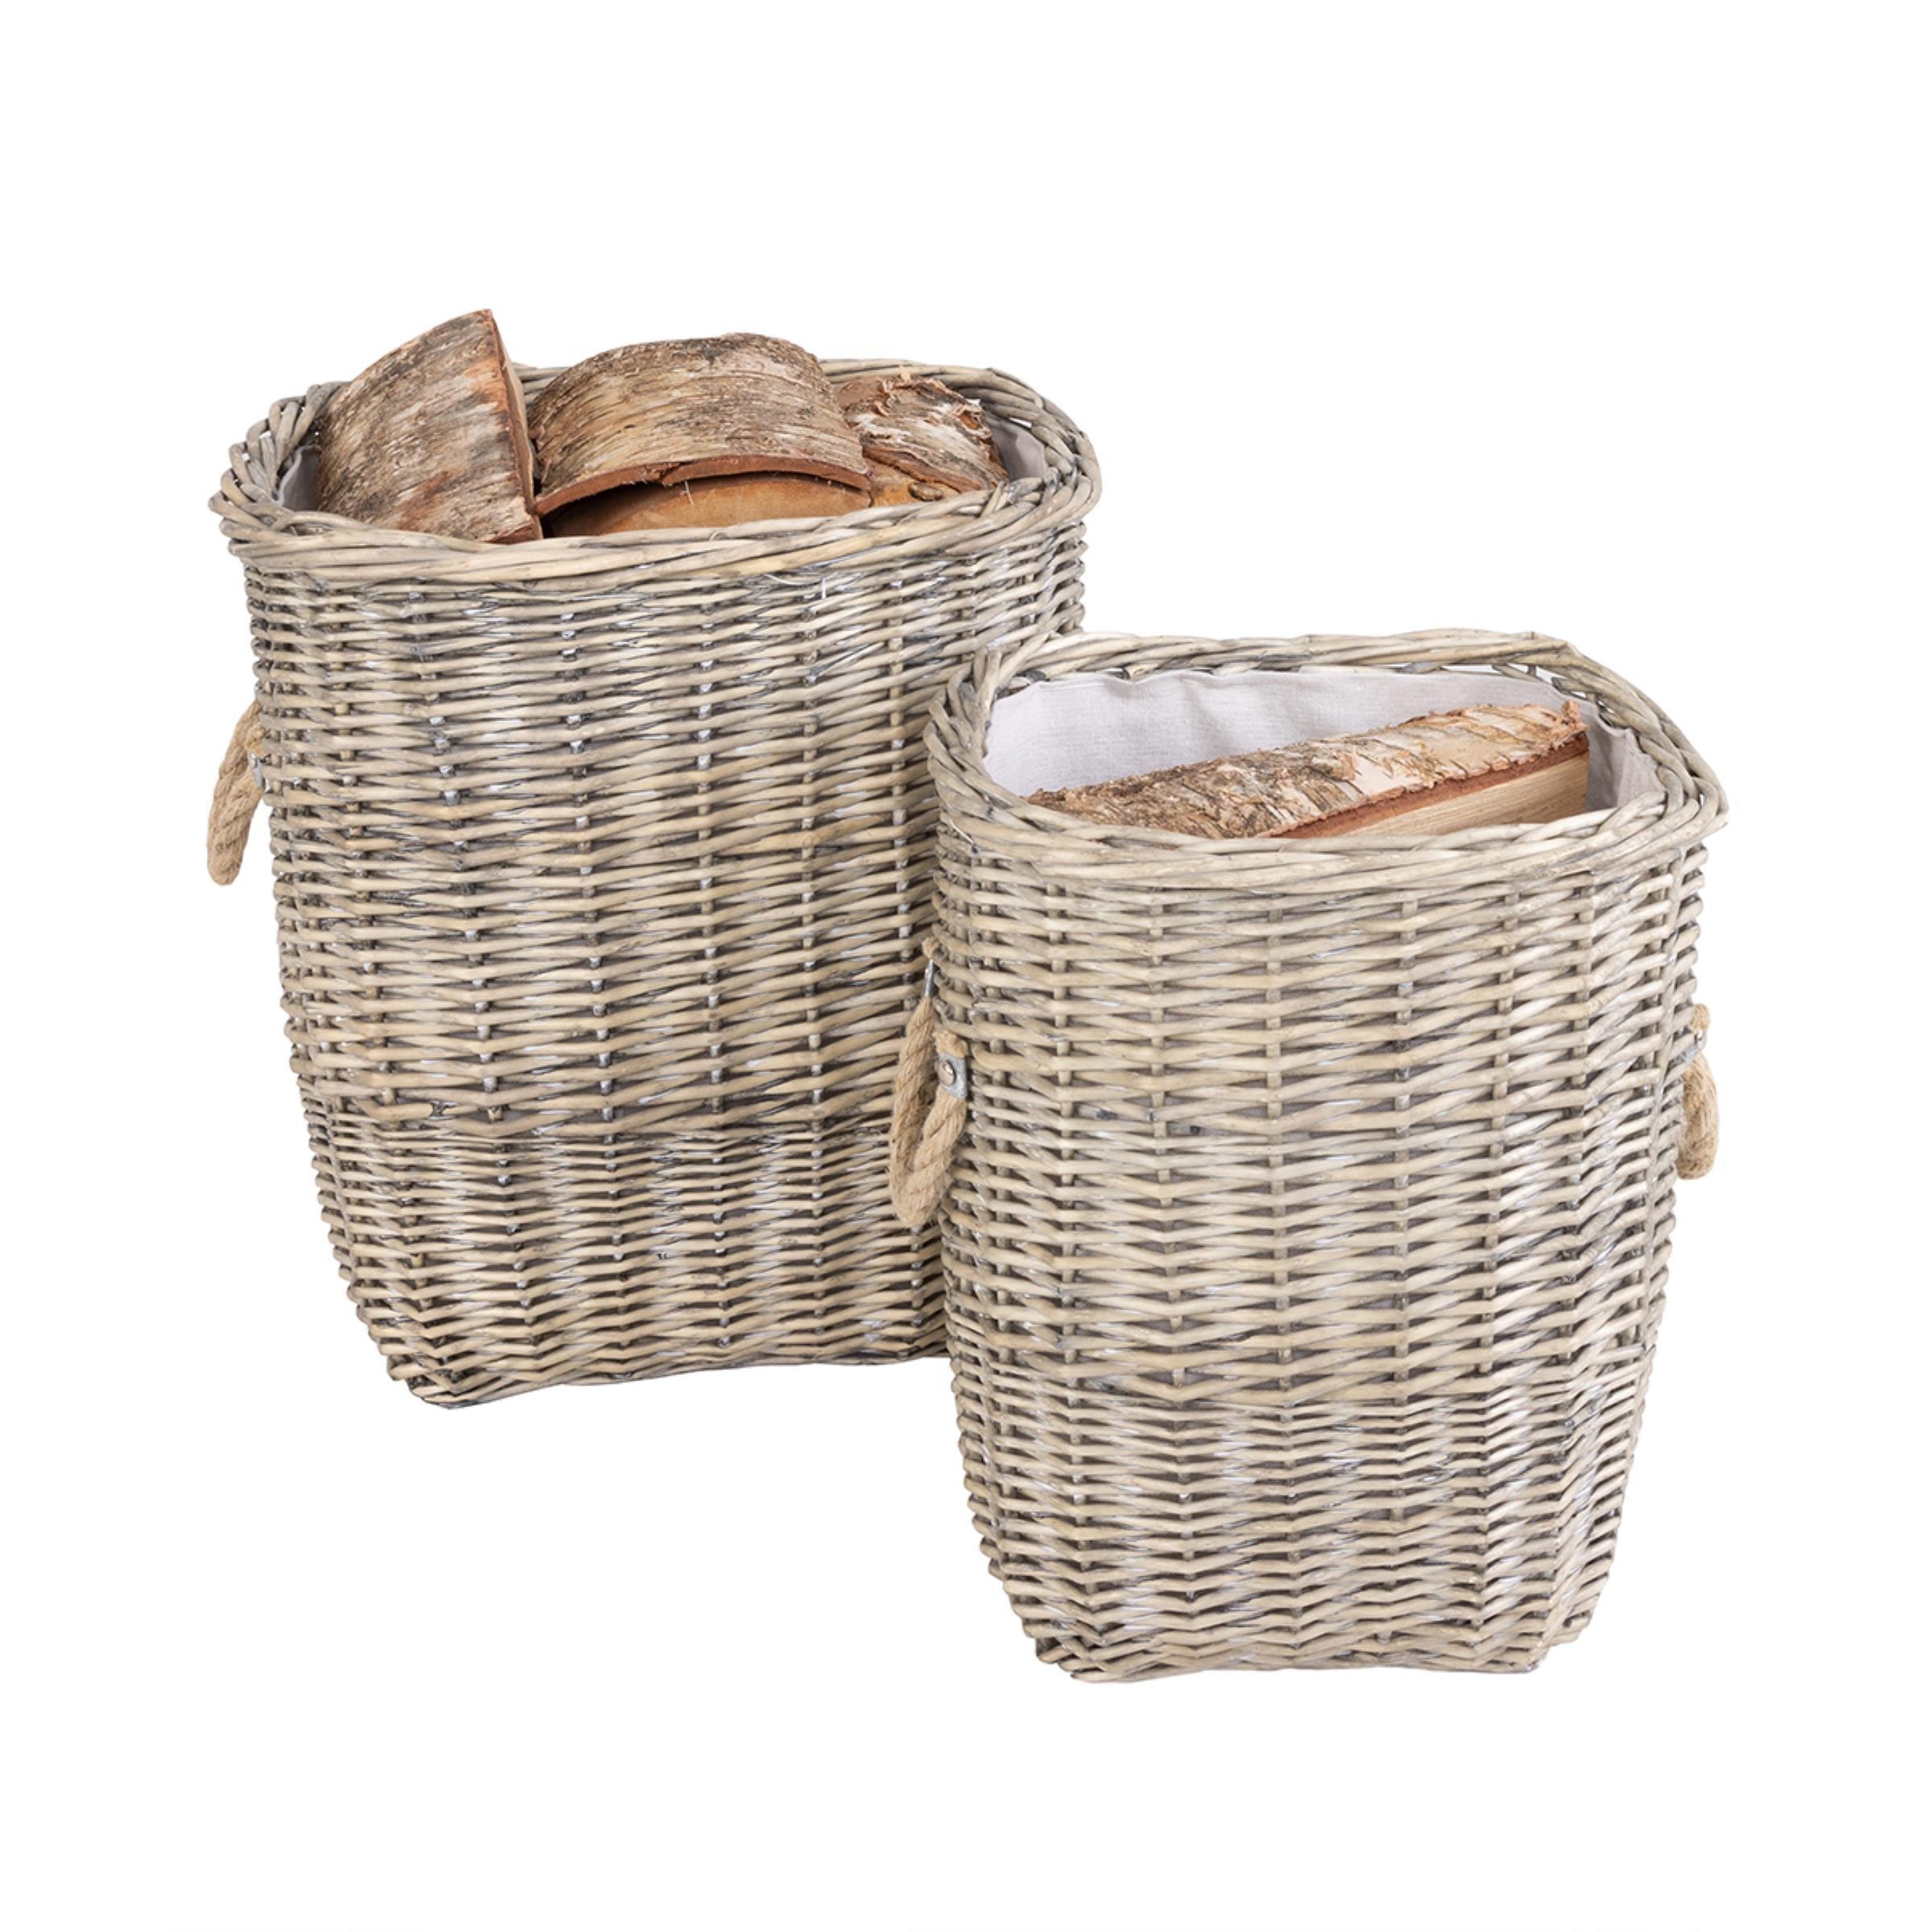 Snug Lime Set Of Two Fabric Lined Wicker Baskets Handmade Rope